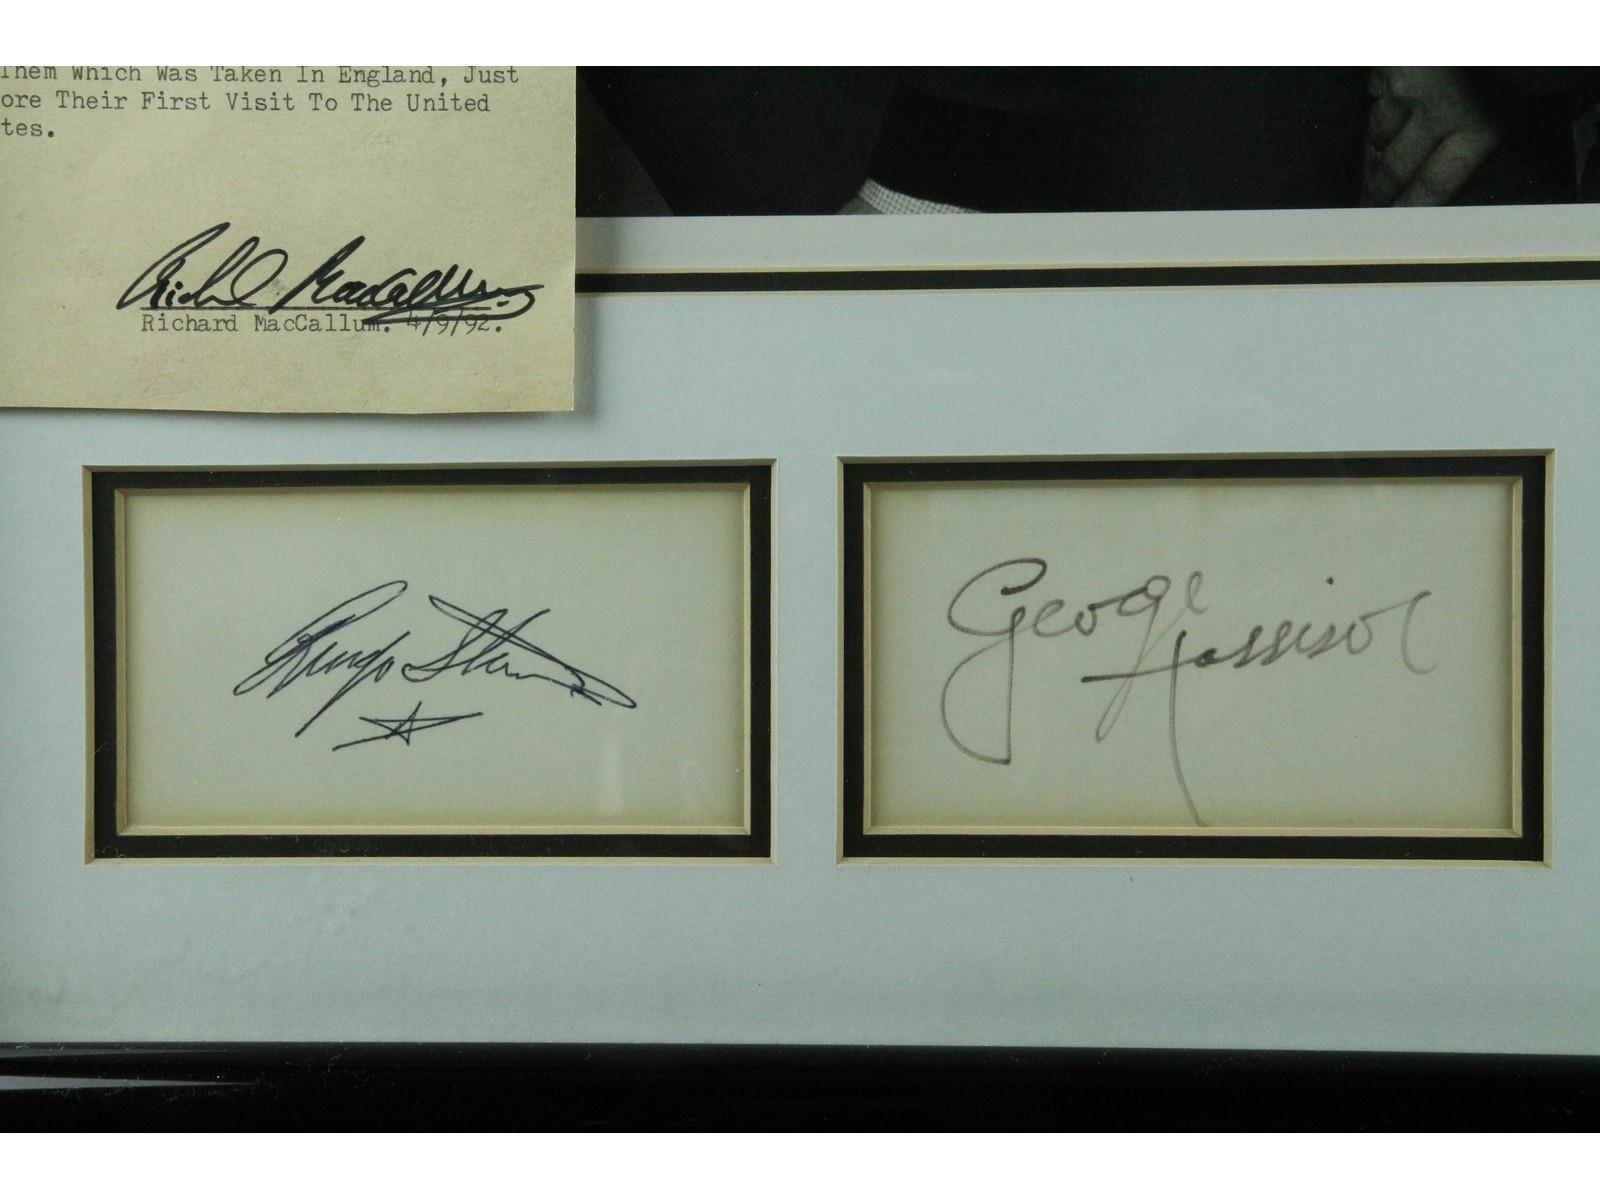 Beatles Framed Photo With Matted Signatures